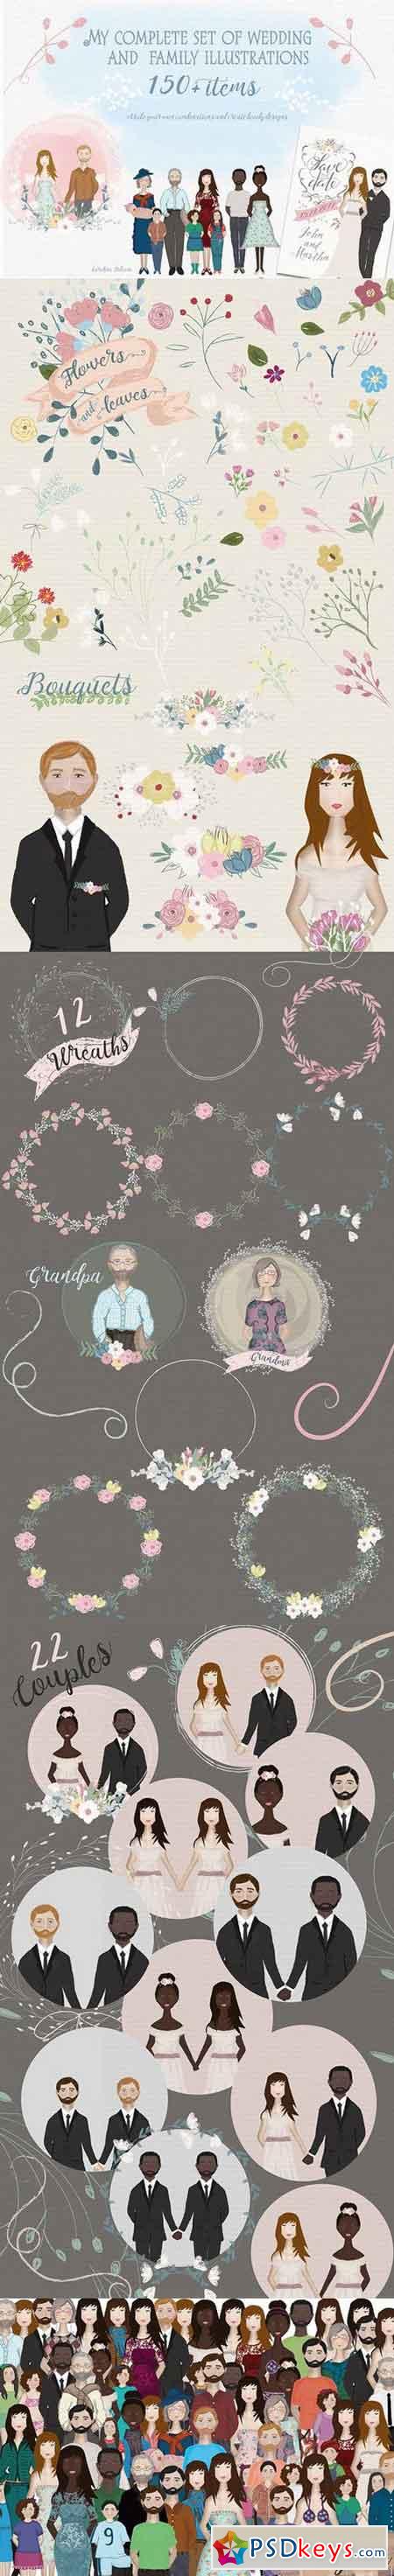 Set of Wedding and Family resources 1169325